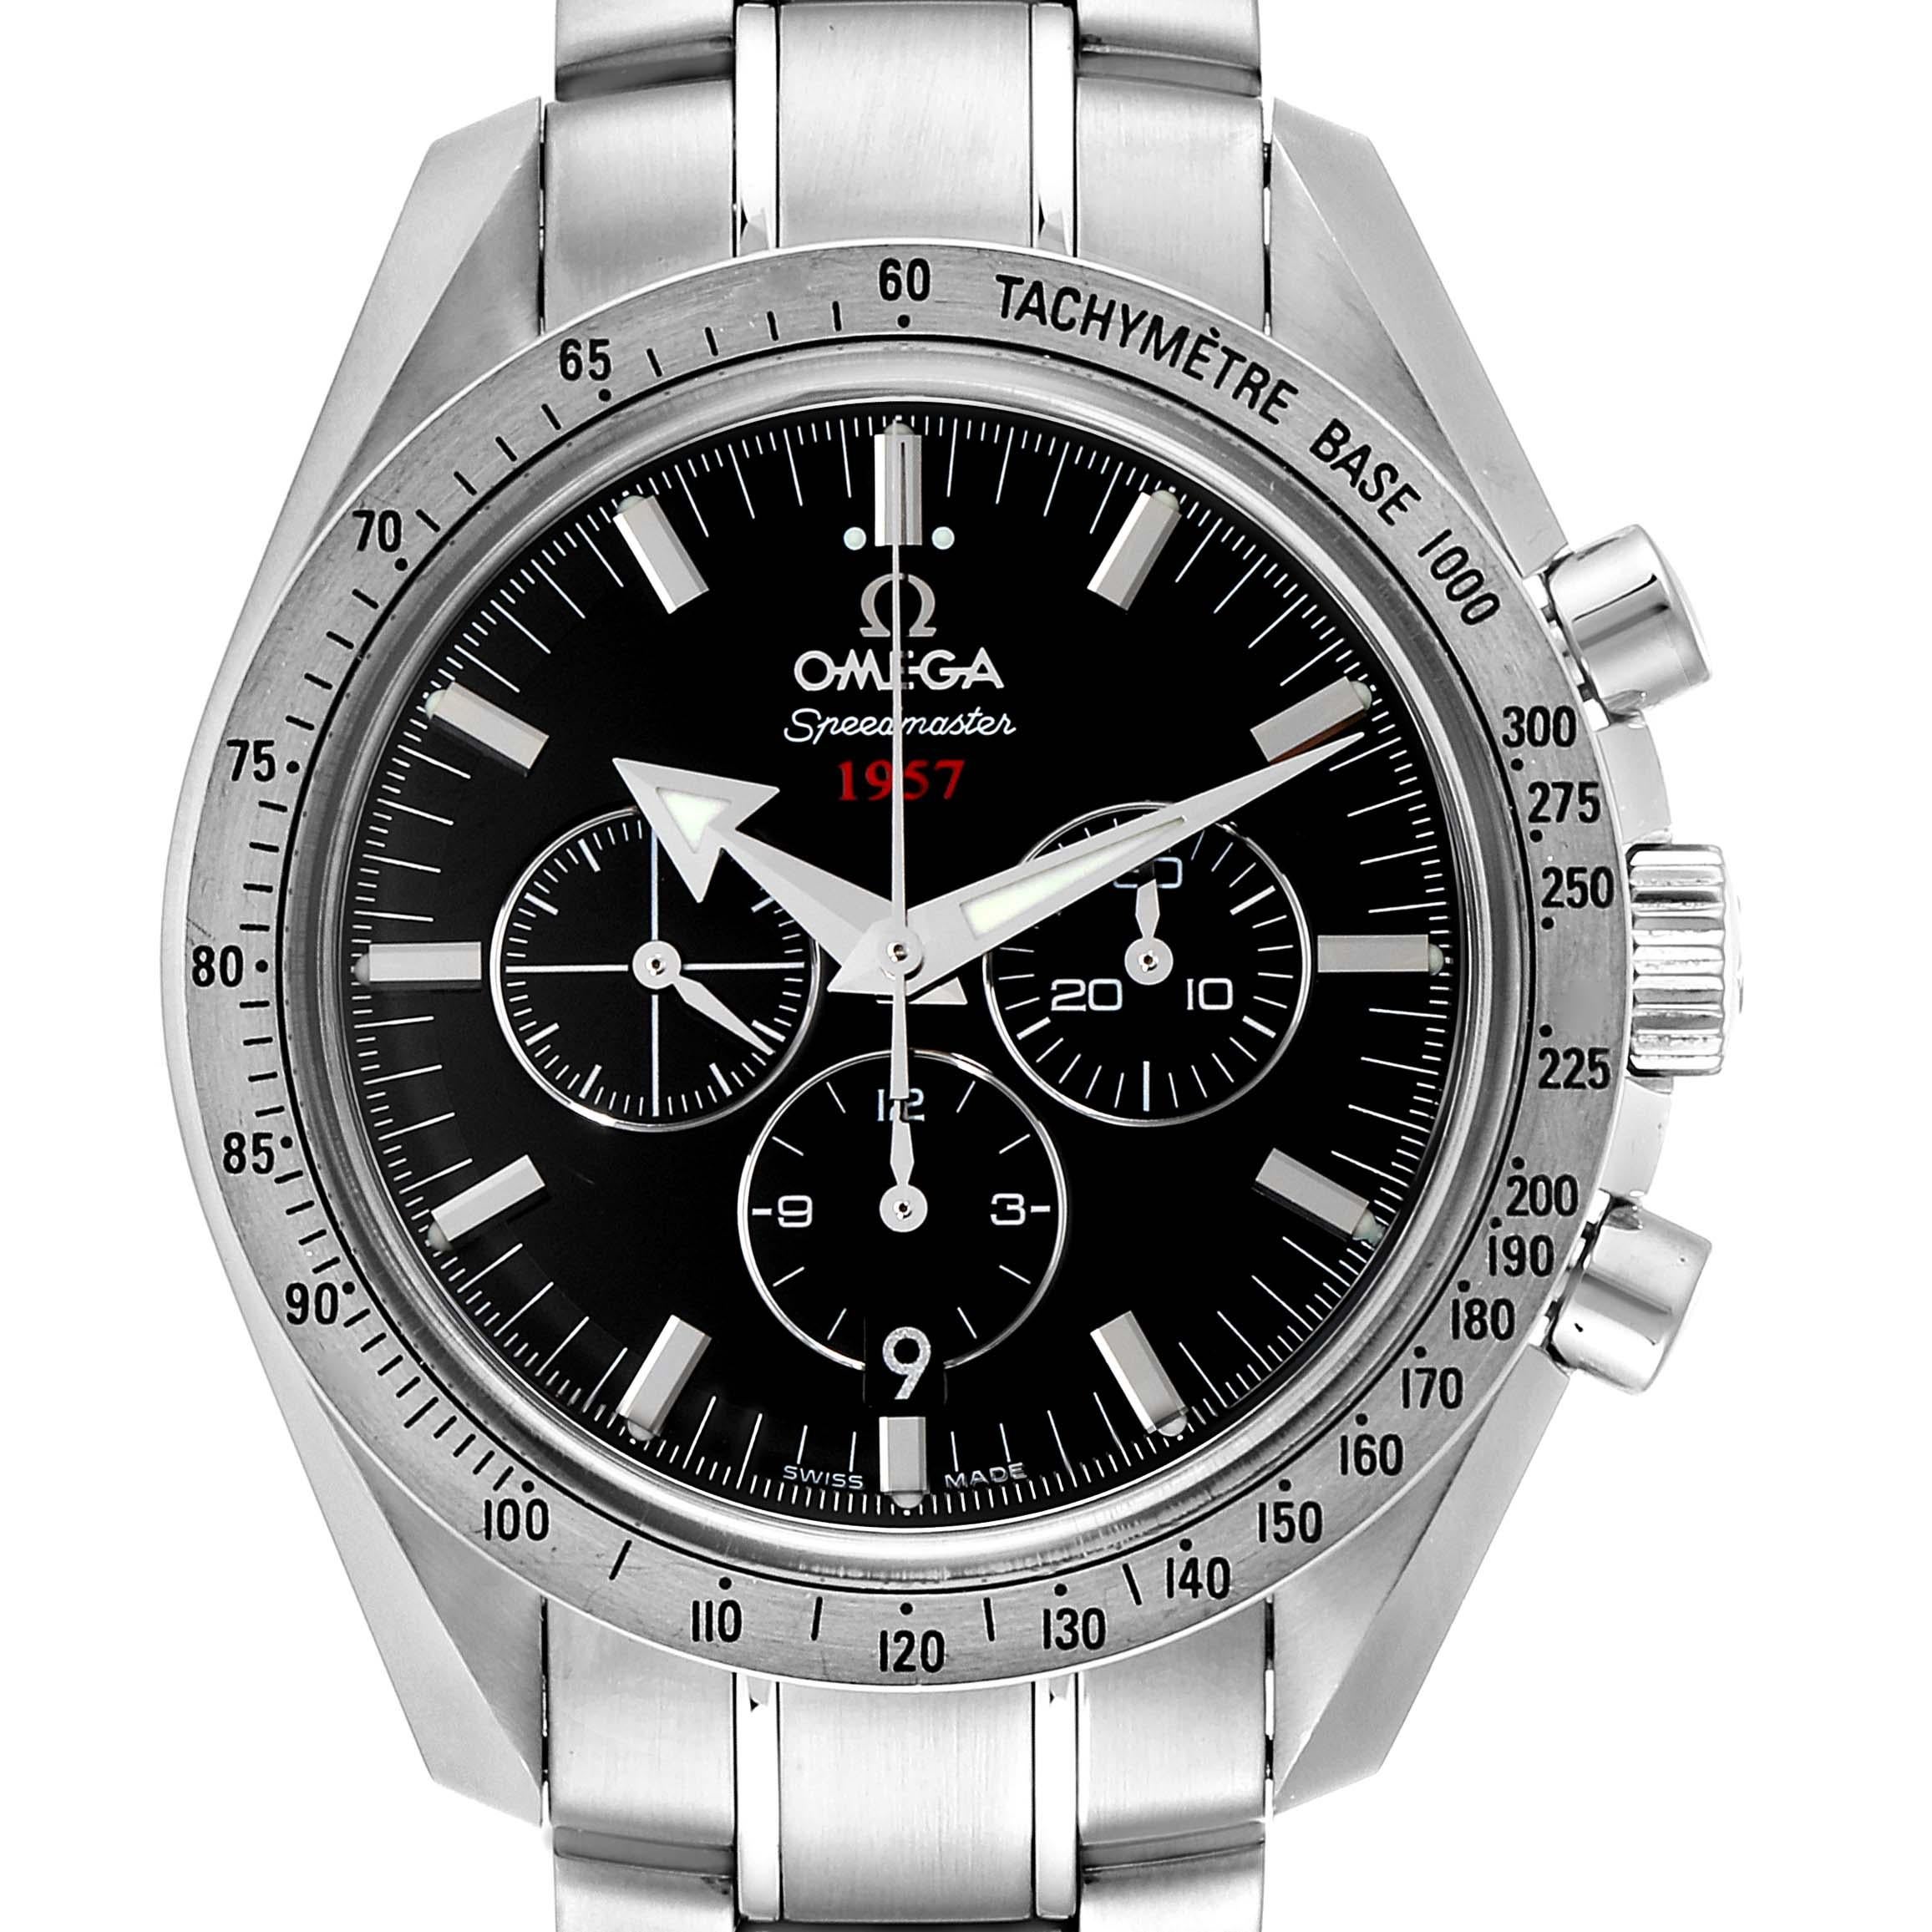 Omega Speedmaster Broad Arrow 1957 Watch 321.10.42.50.01.001. Automatic self-winding chronograph movement with column wheel mechanism and Co-Axial Escapement. Stainless steel round case 42.0 mm in diameter. Stainless steel bezel with tachymetre